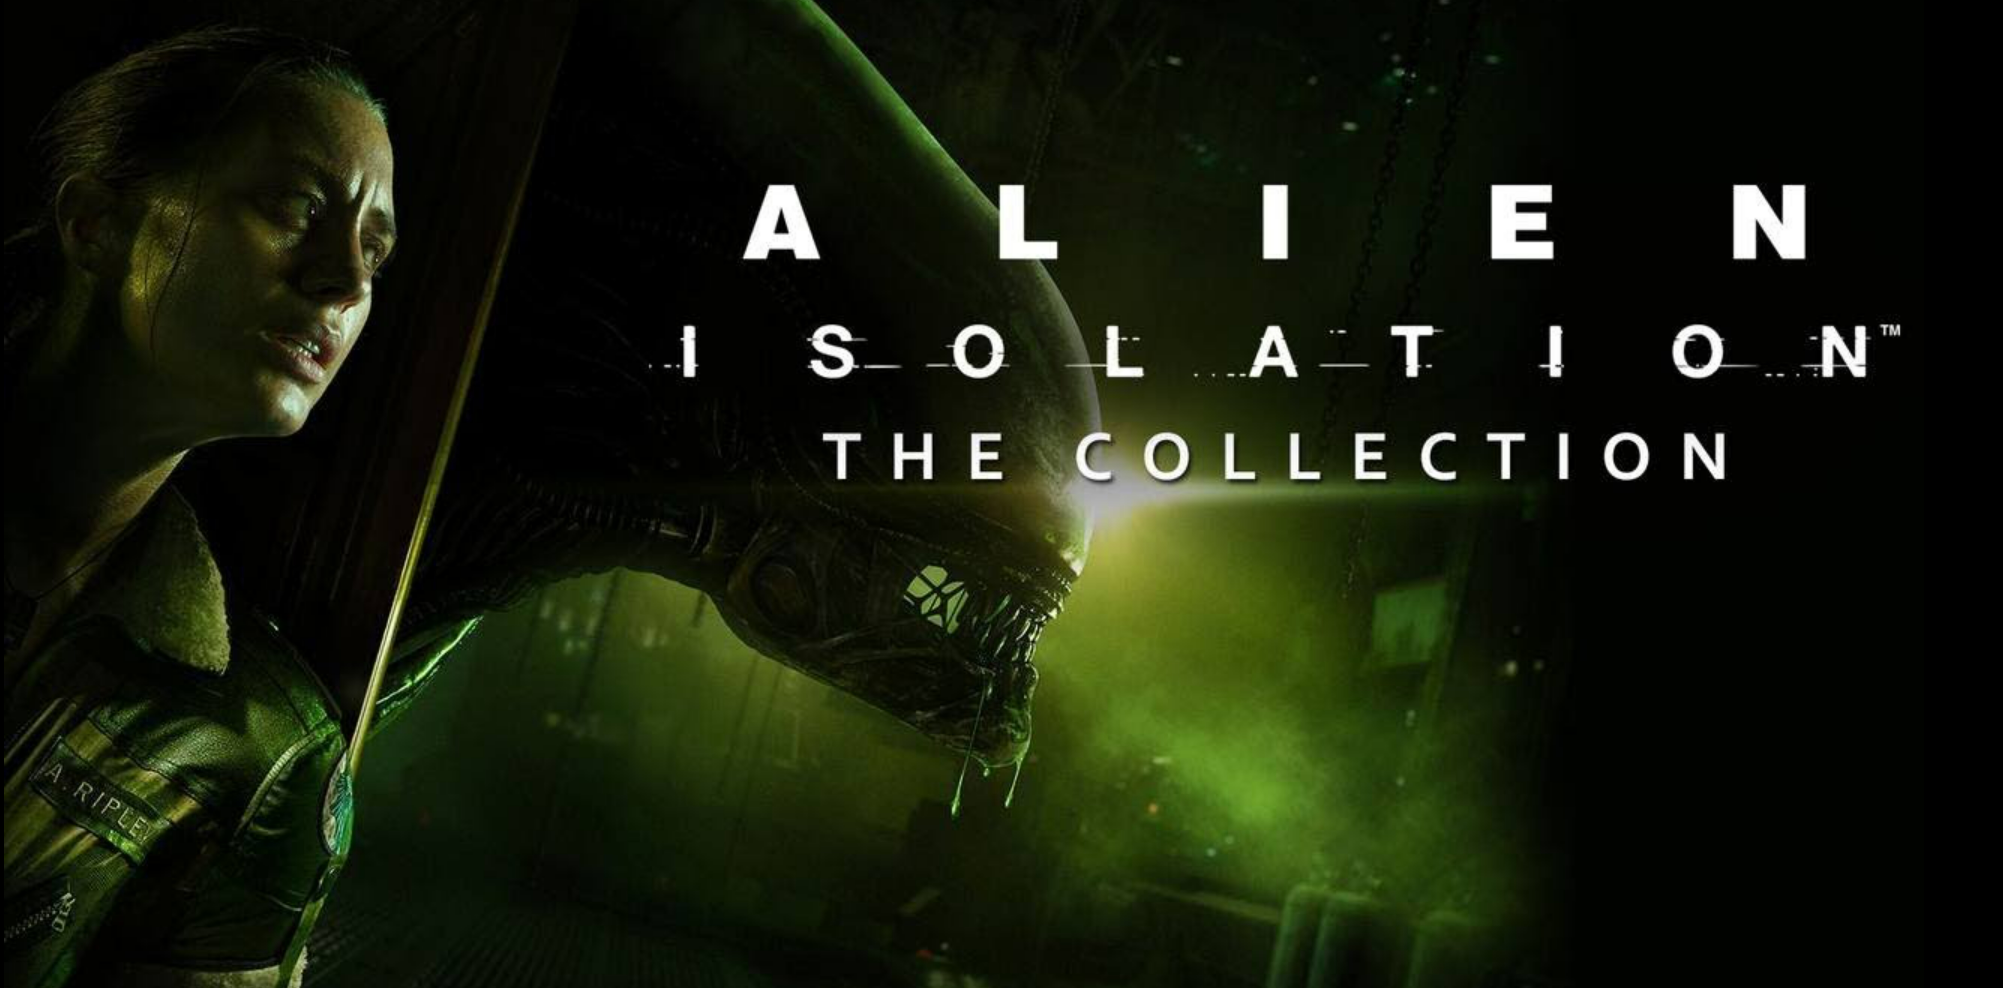 Alien isolation the collection steam